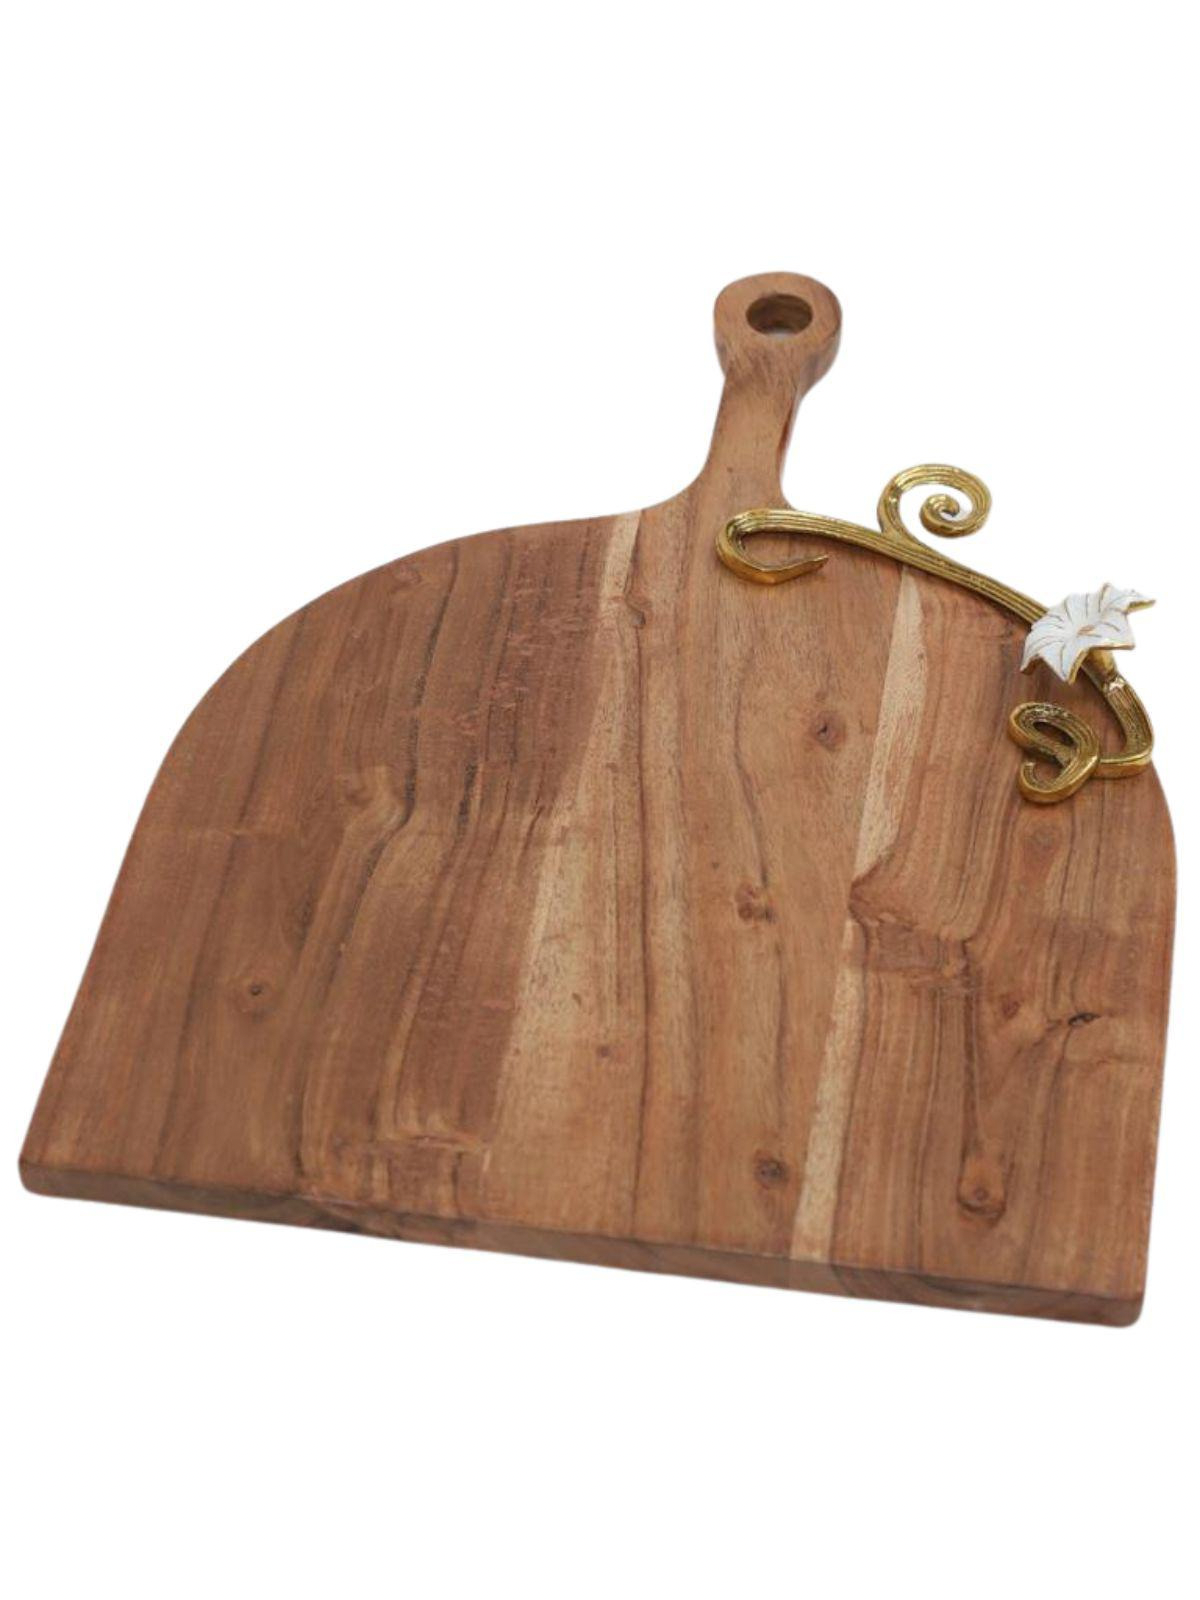 Luxurious Wood Charcuterie Board with Gold Flower Design and Flat Base, 15L X 11W.